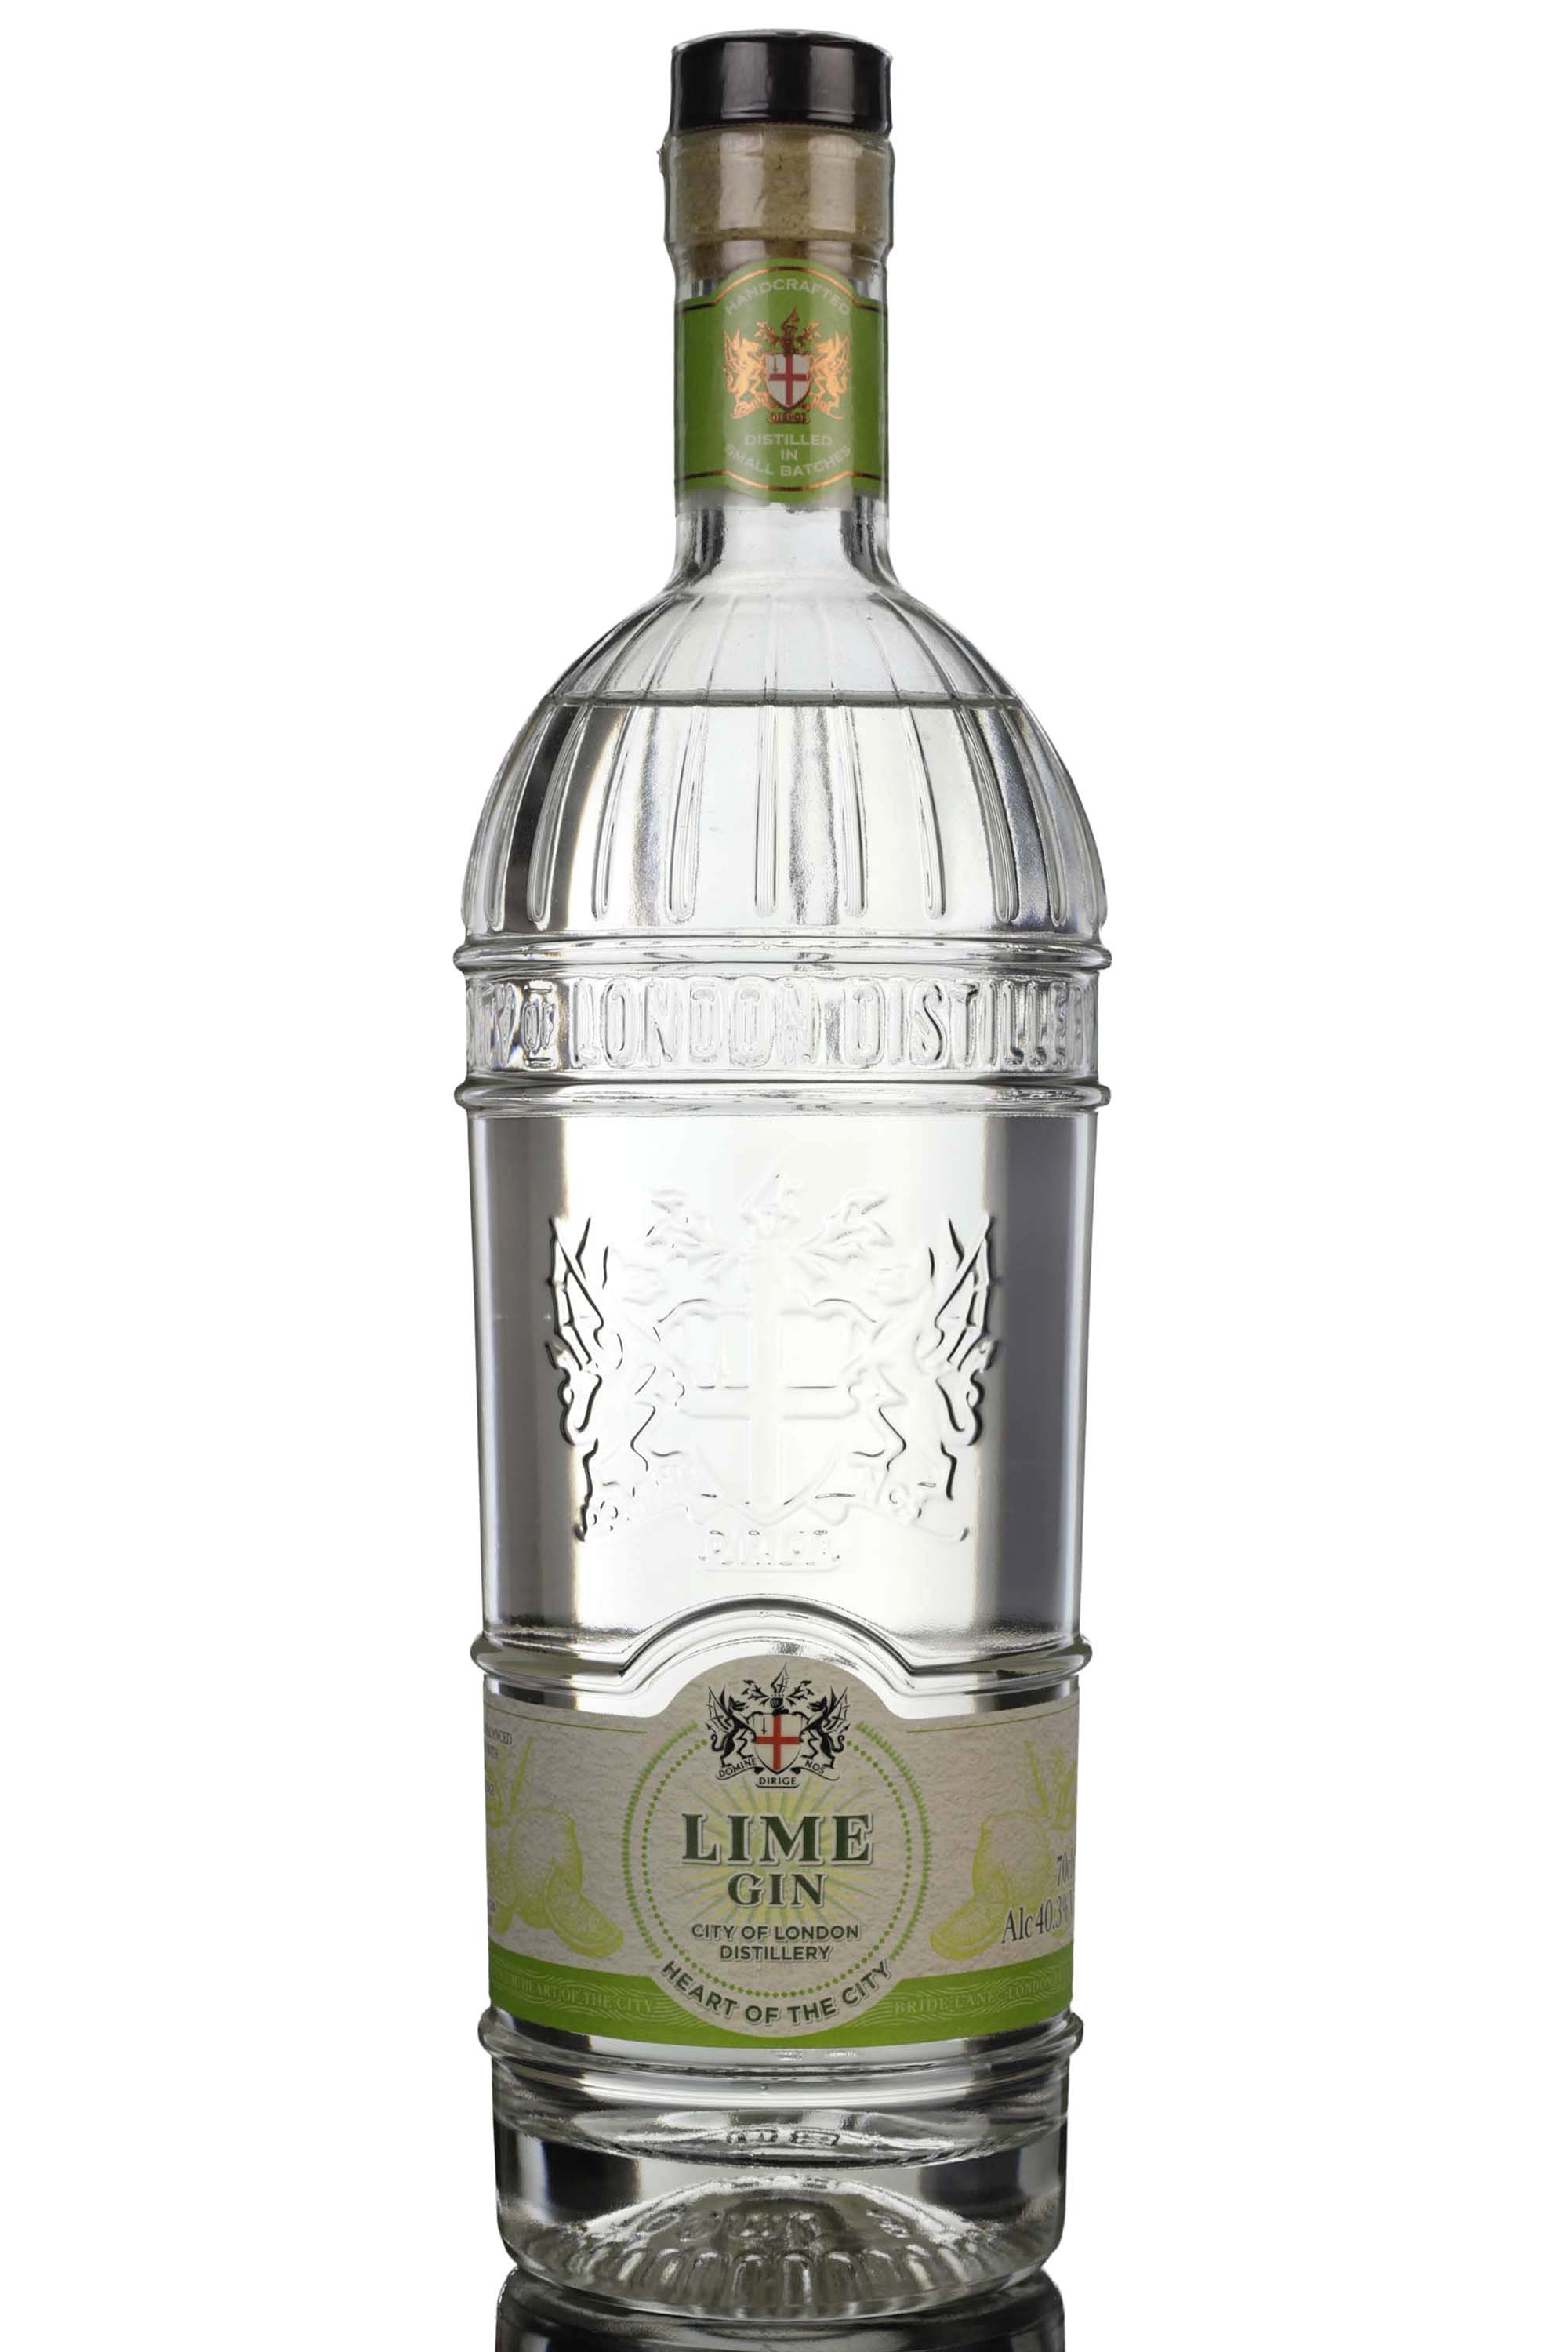 City Of London Lime Gin